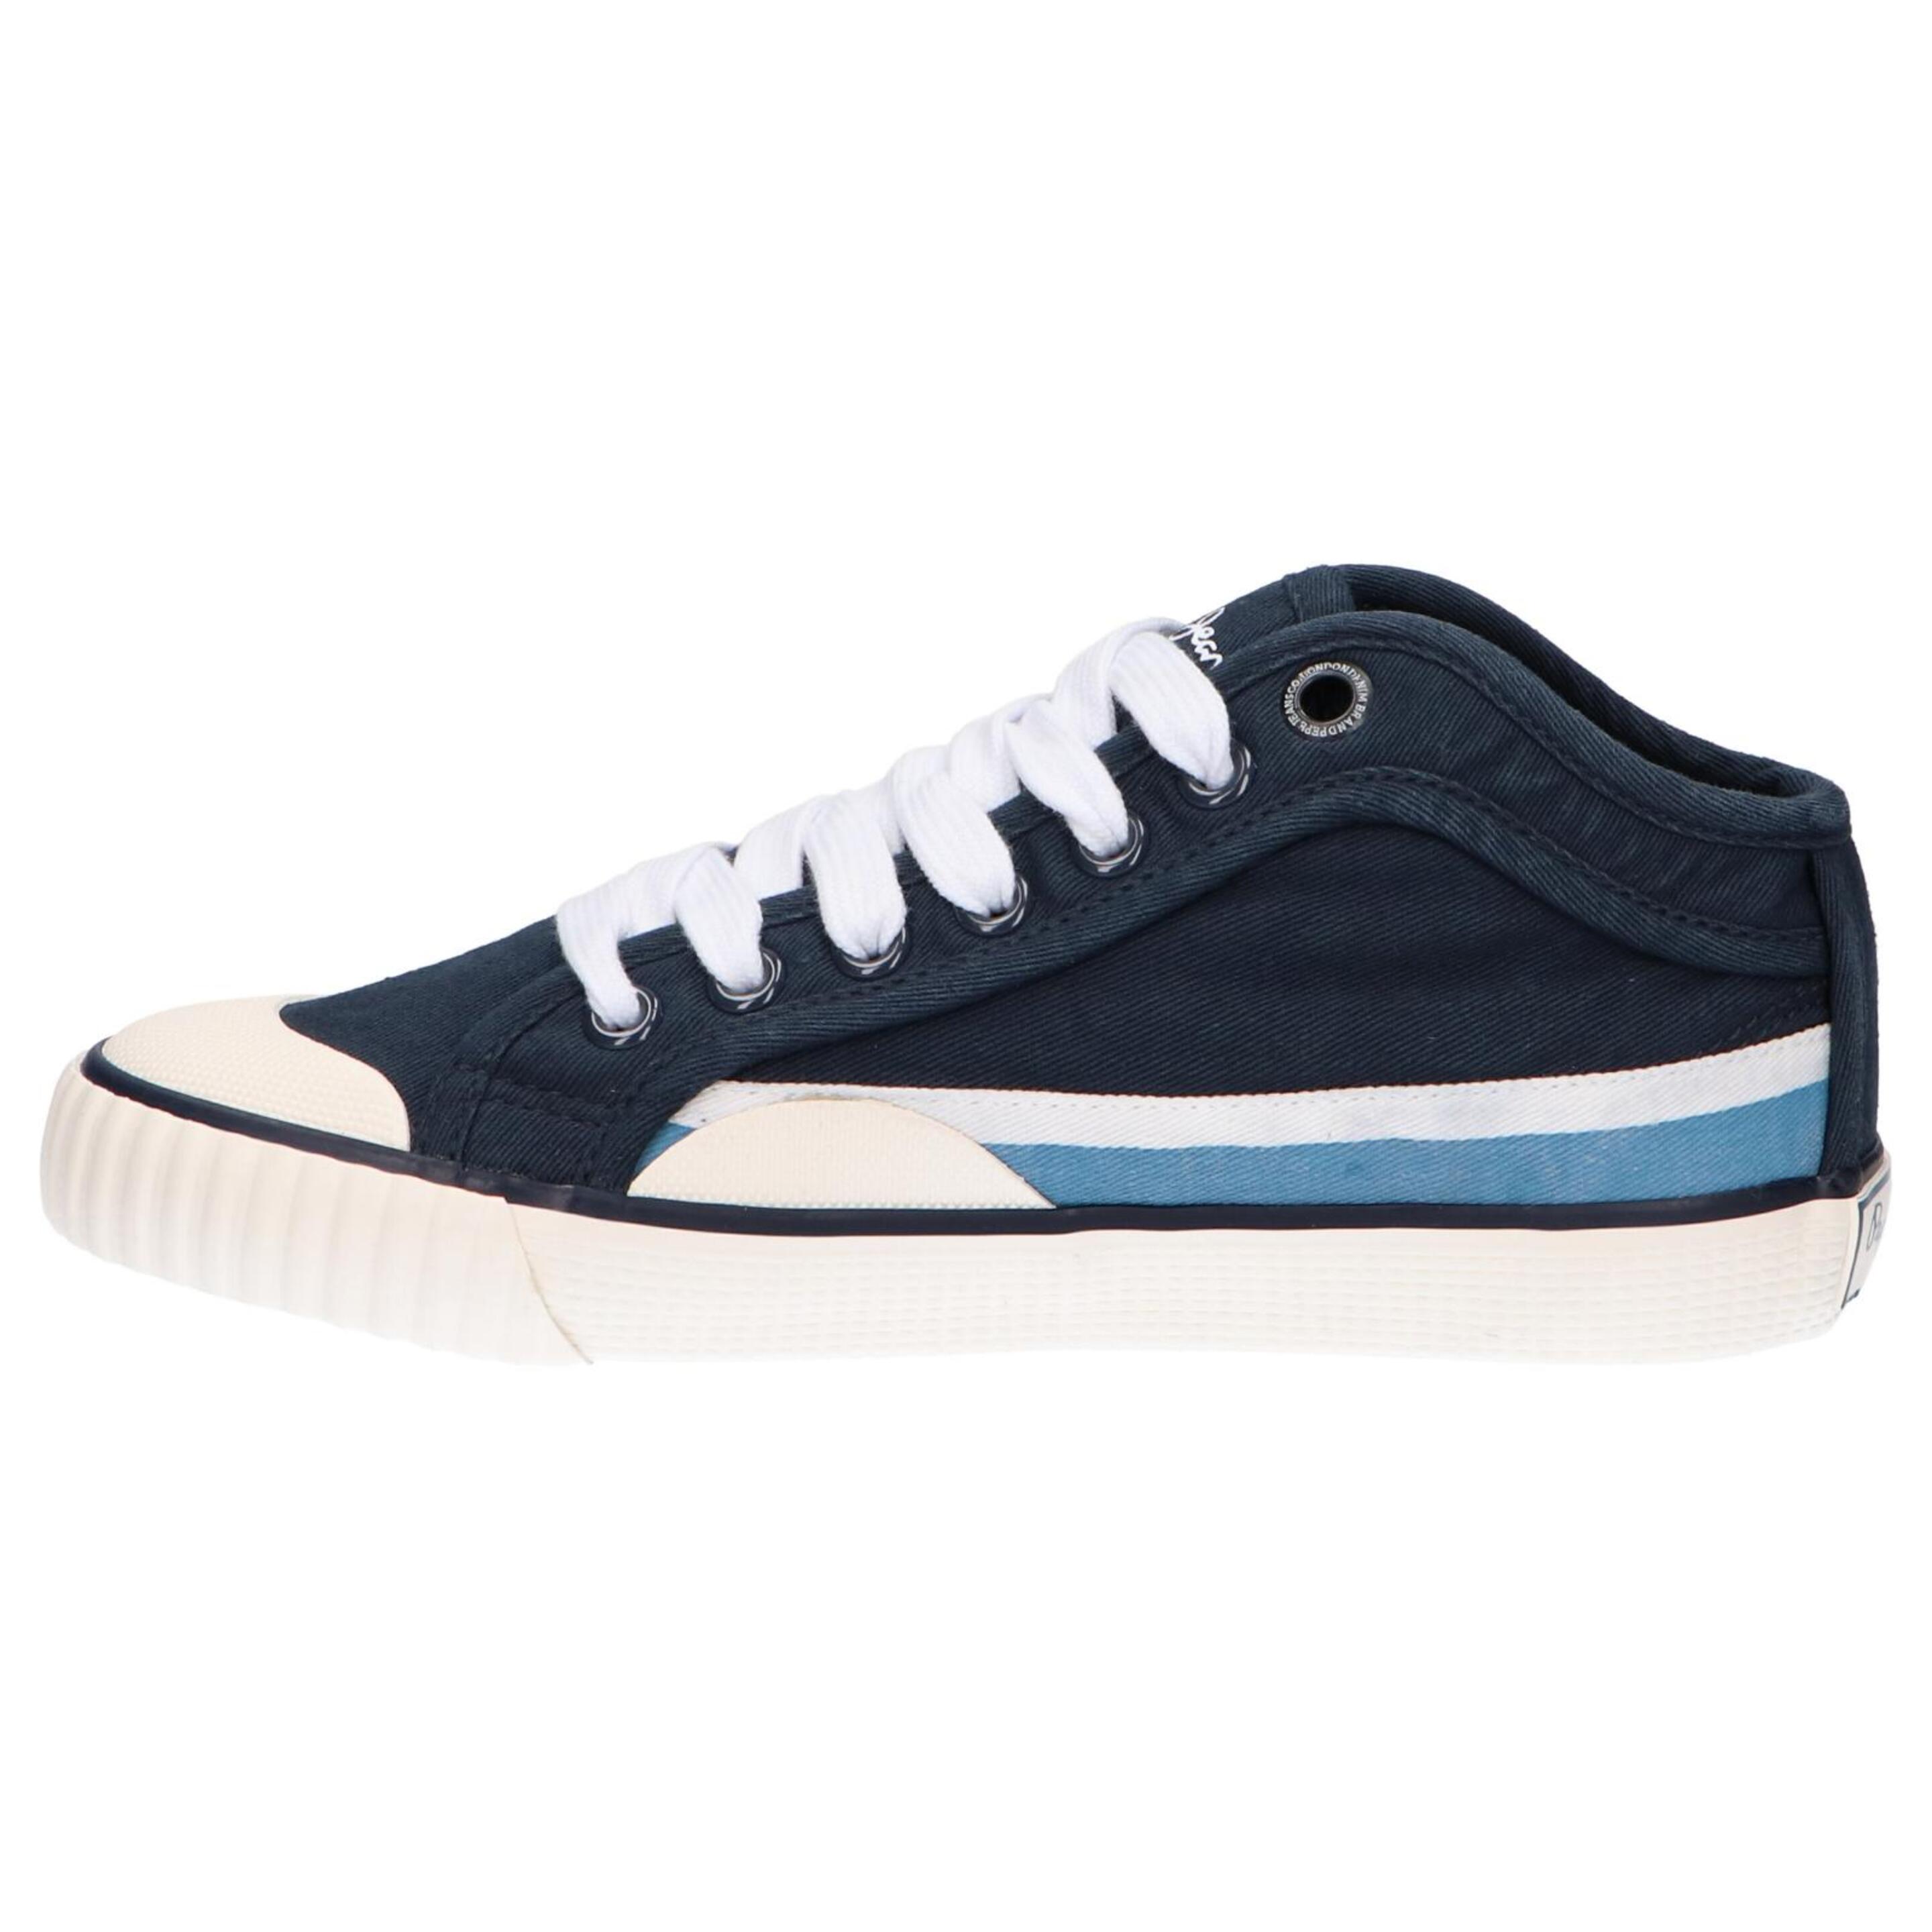 Zapatillas Pepe Jeans Industry Surf Pbs30426